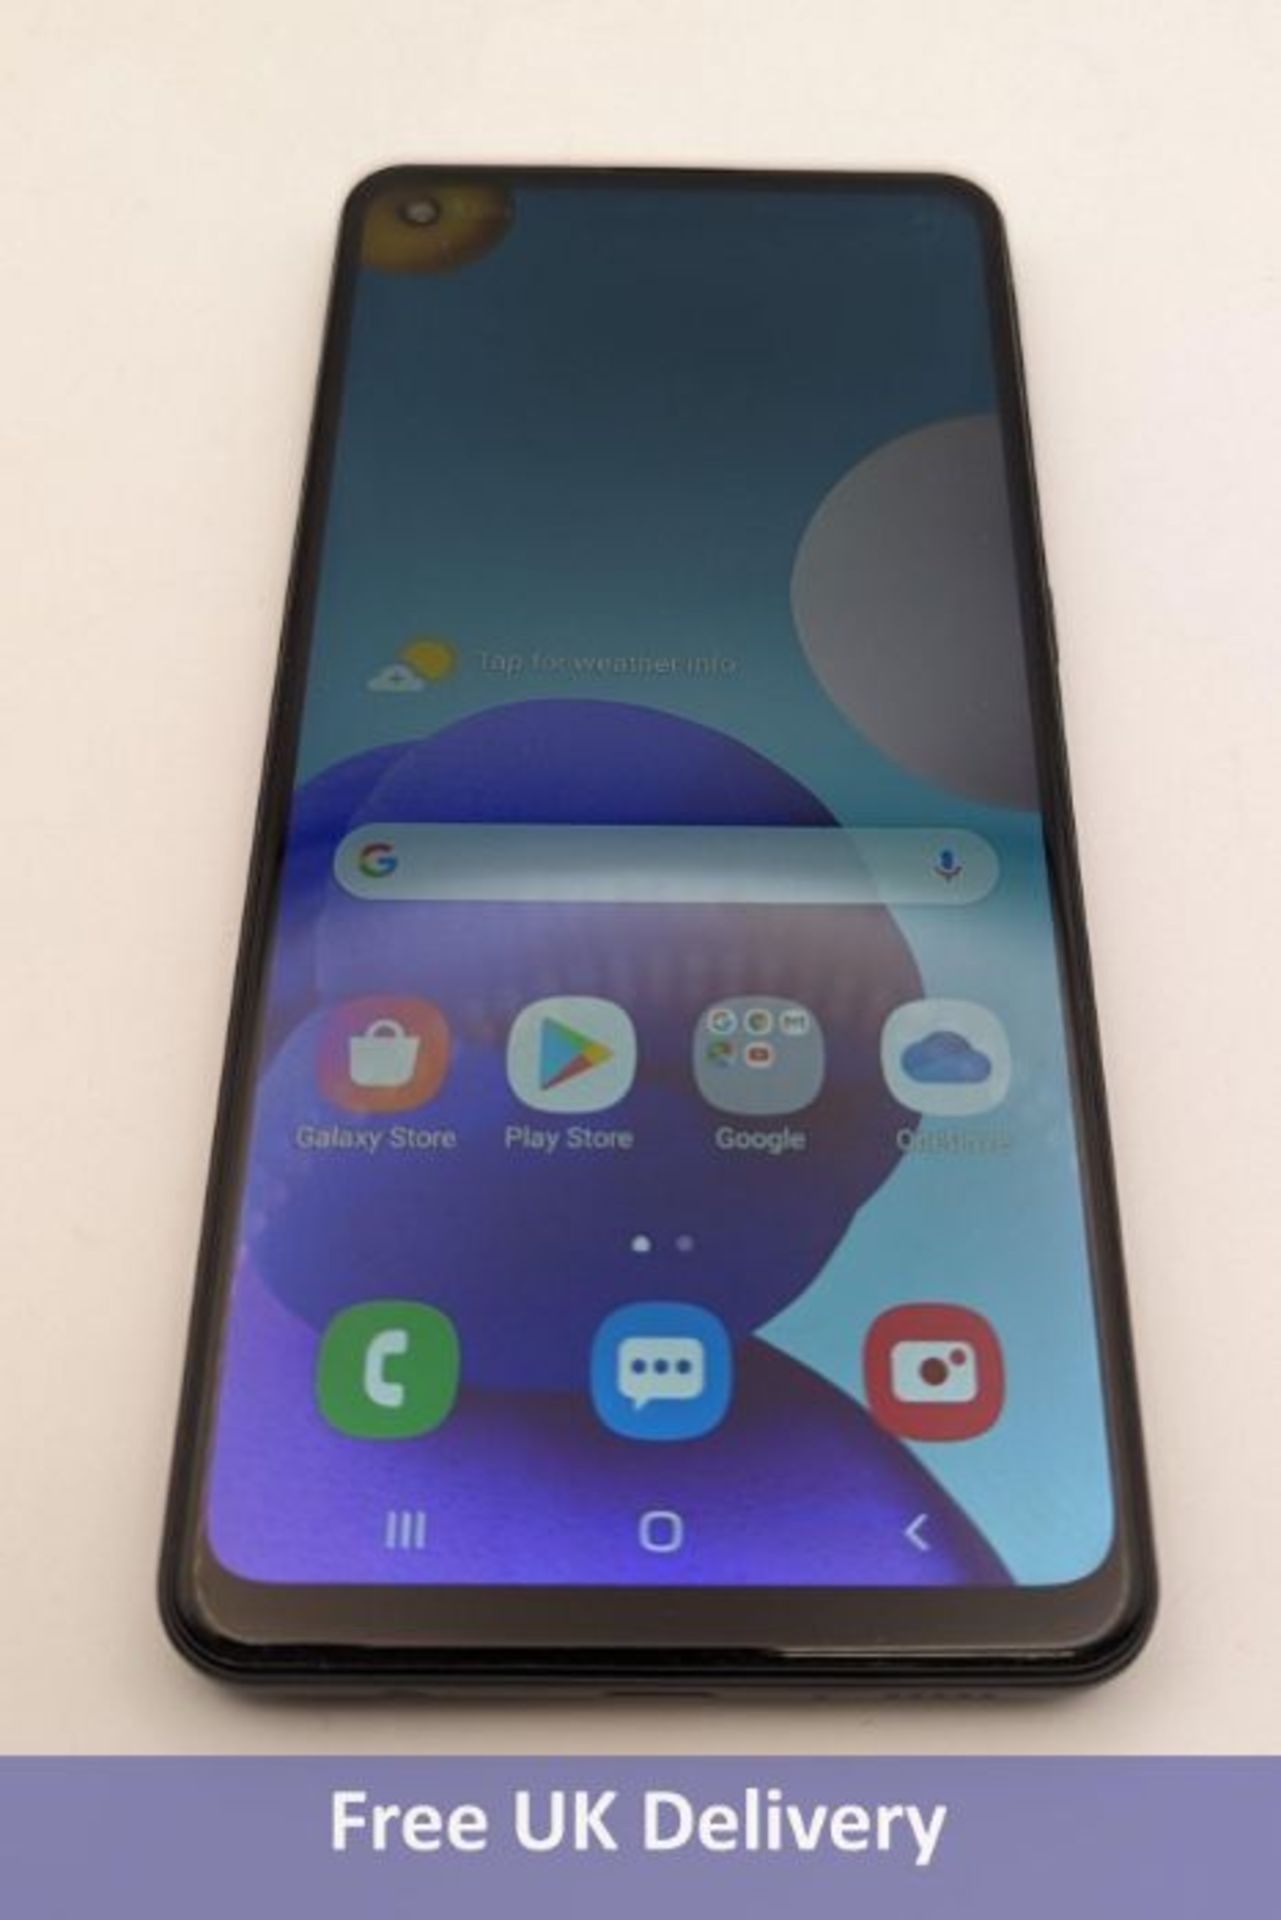 Samsung Galaxy A21s Android Mobile Phone, 3GB RAM, 32GB Storage. Used, no box or accessories. EE Net